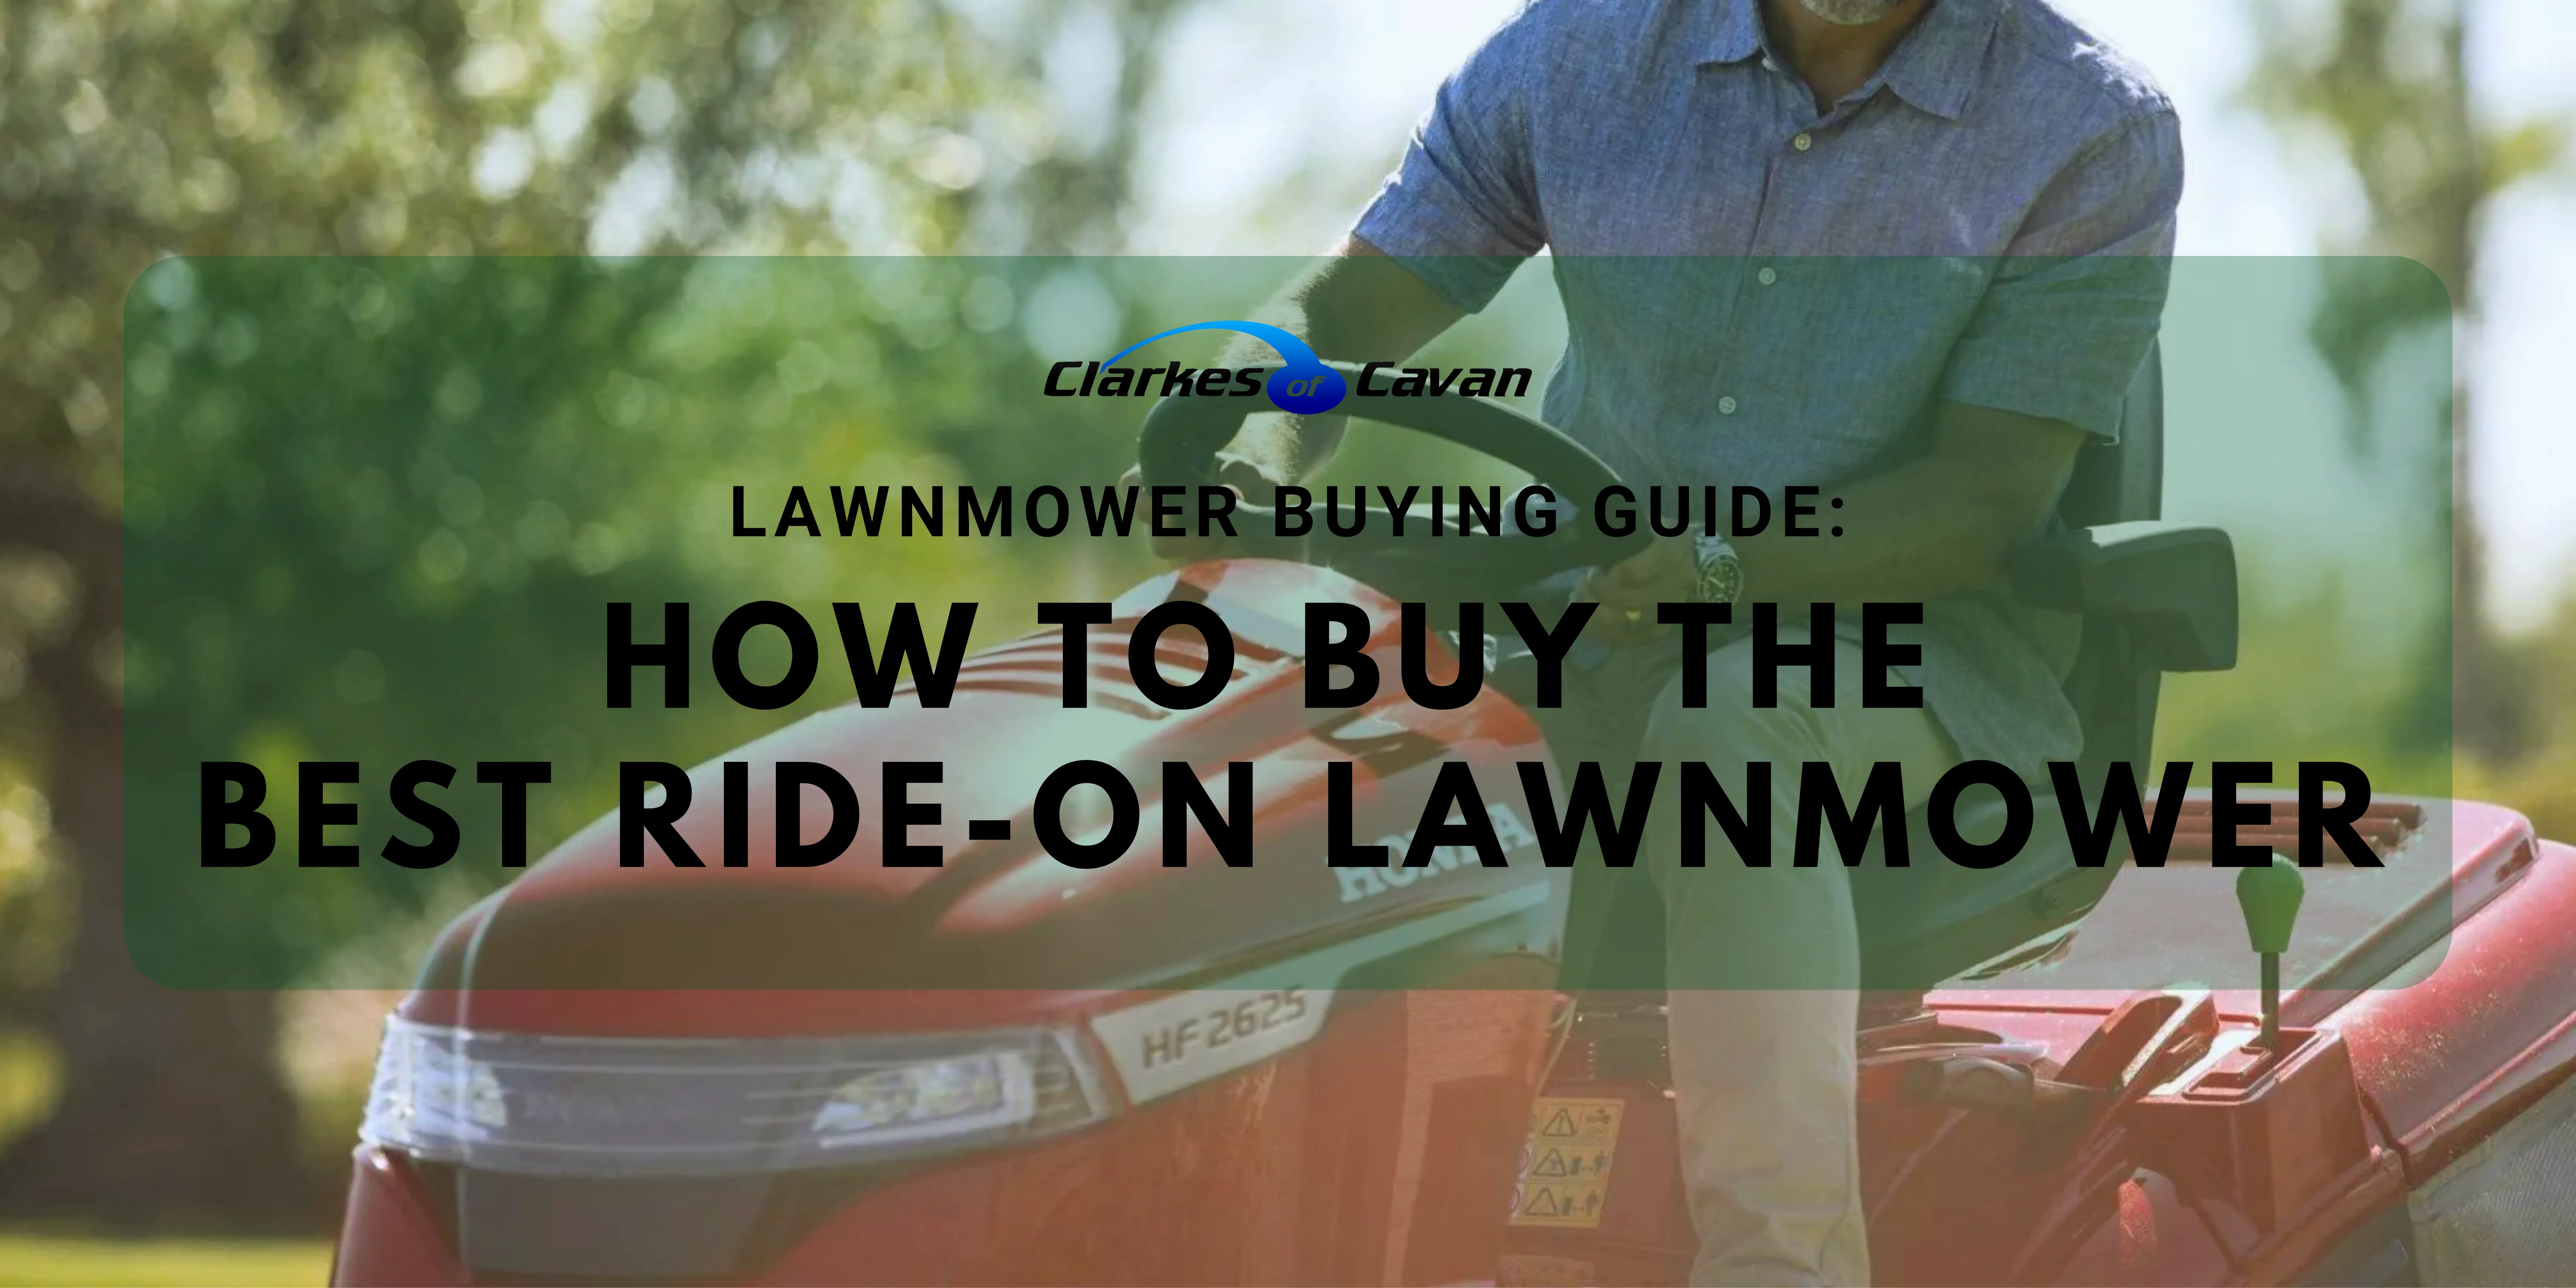 Lawnmower Buying Guide: How to Buy the Best Ride On Lawnmower